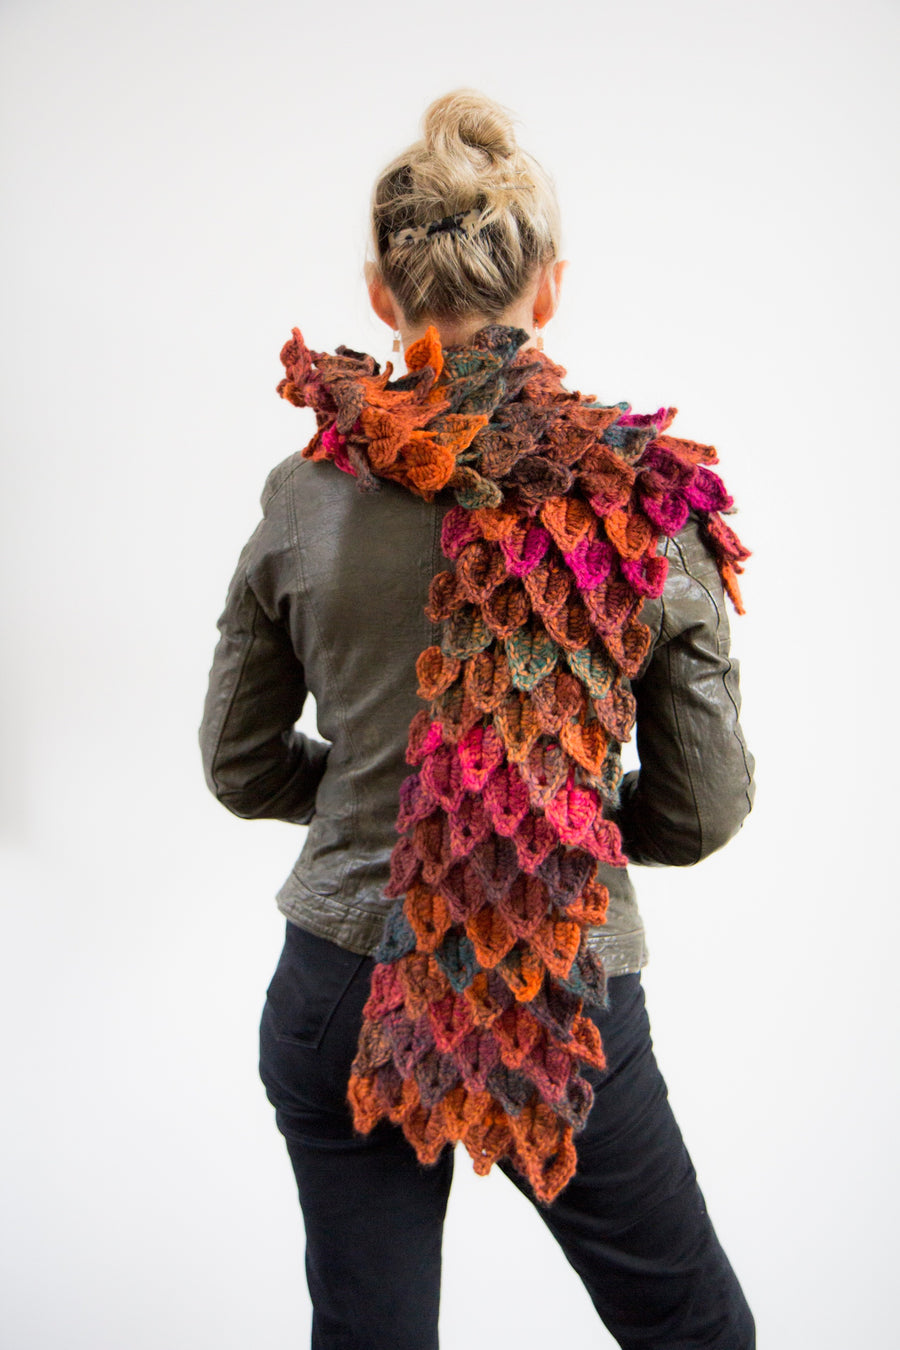 Autumn Leaves Handknitted Scarf